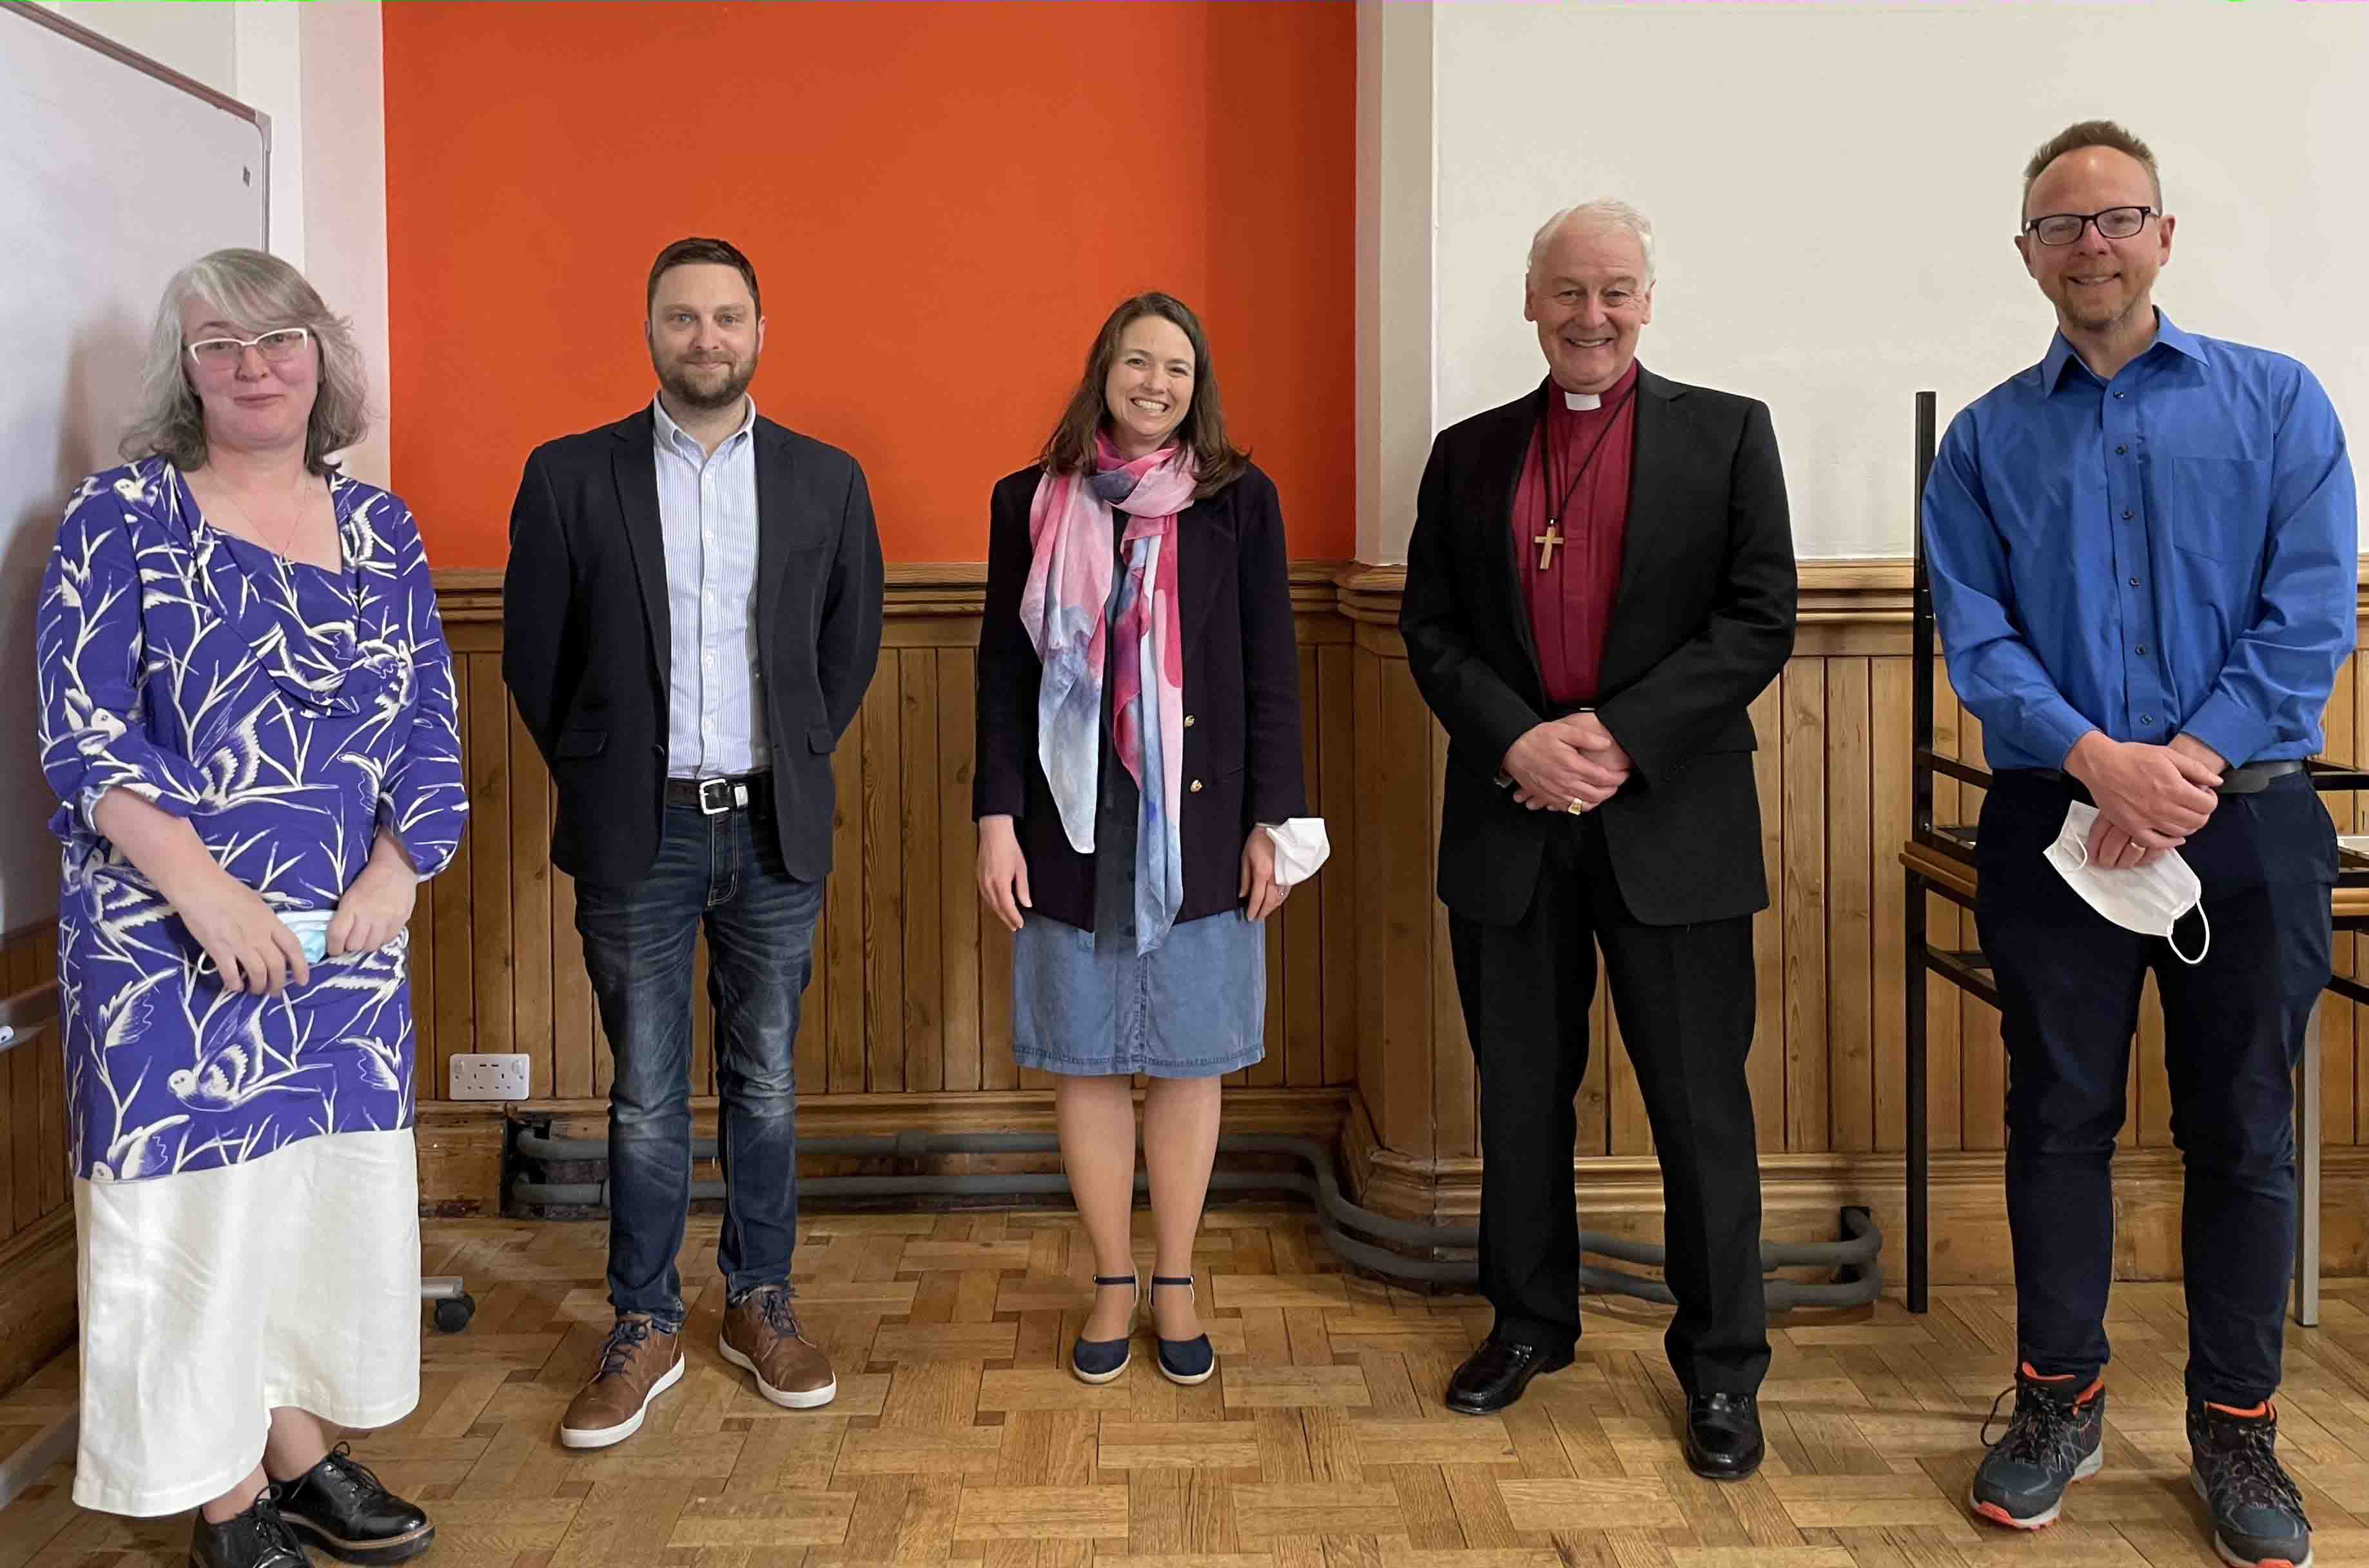 The Revd Prof Anne Lodge, Dr Brad Anderson, Dr Katie Heffelfinger, Archbishop Michael Jackson and Dr Peter Admirand.